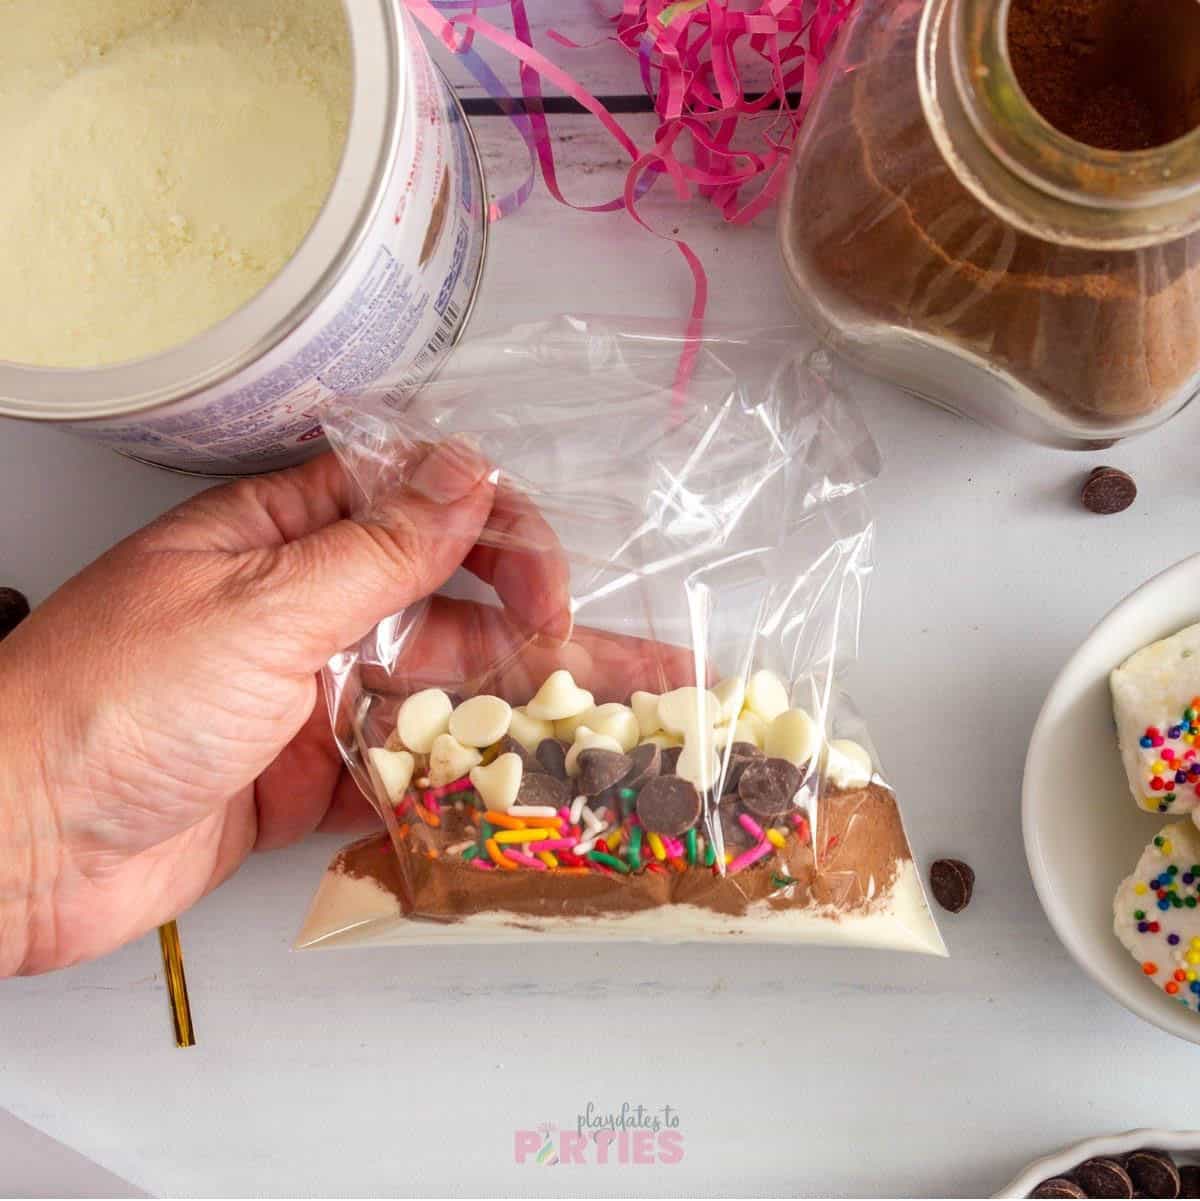 A cellophane bag shows layers of powdered milk, hot cocoa, sprinkles, and chocolate chips.